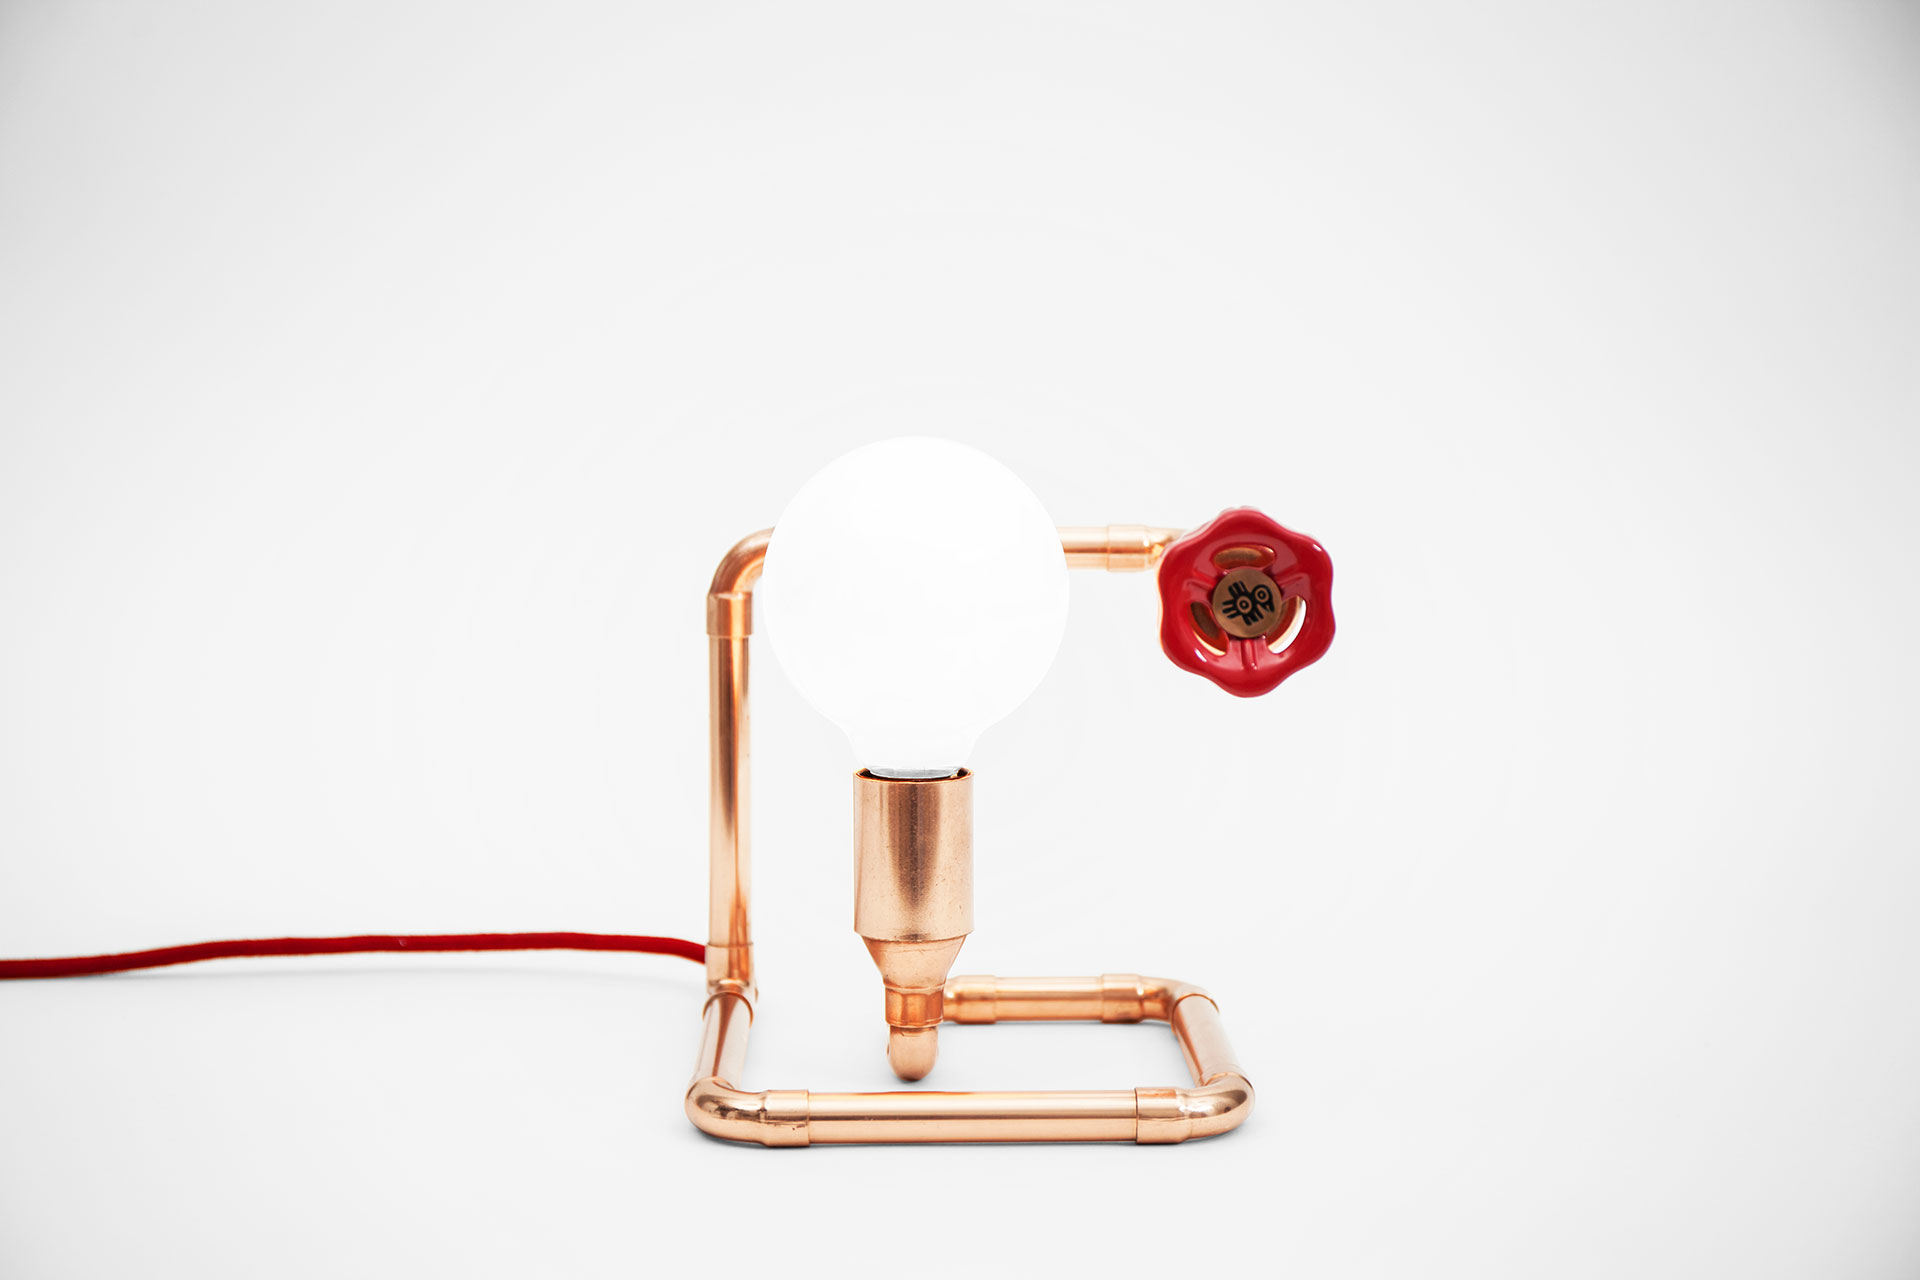 Simple bedside lamp in trendy copper color with red knob dimmer and red braided cord in minimalist style